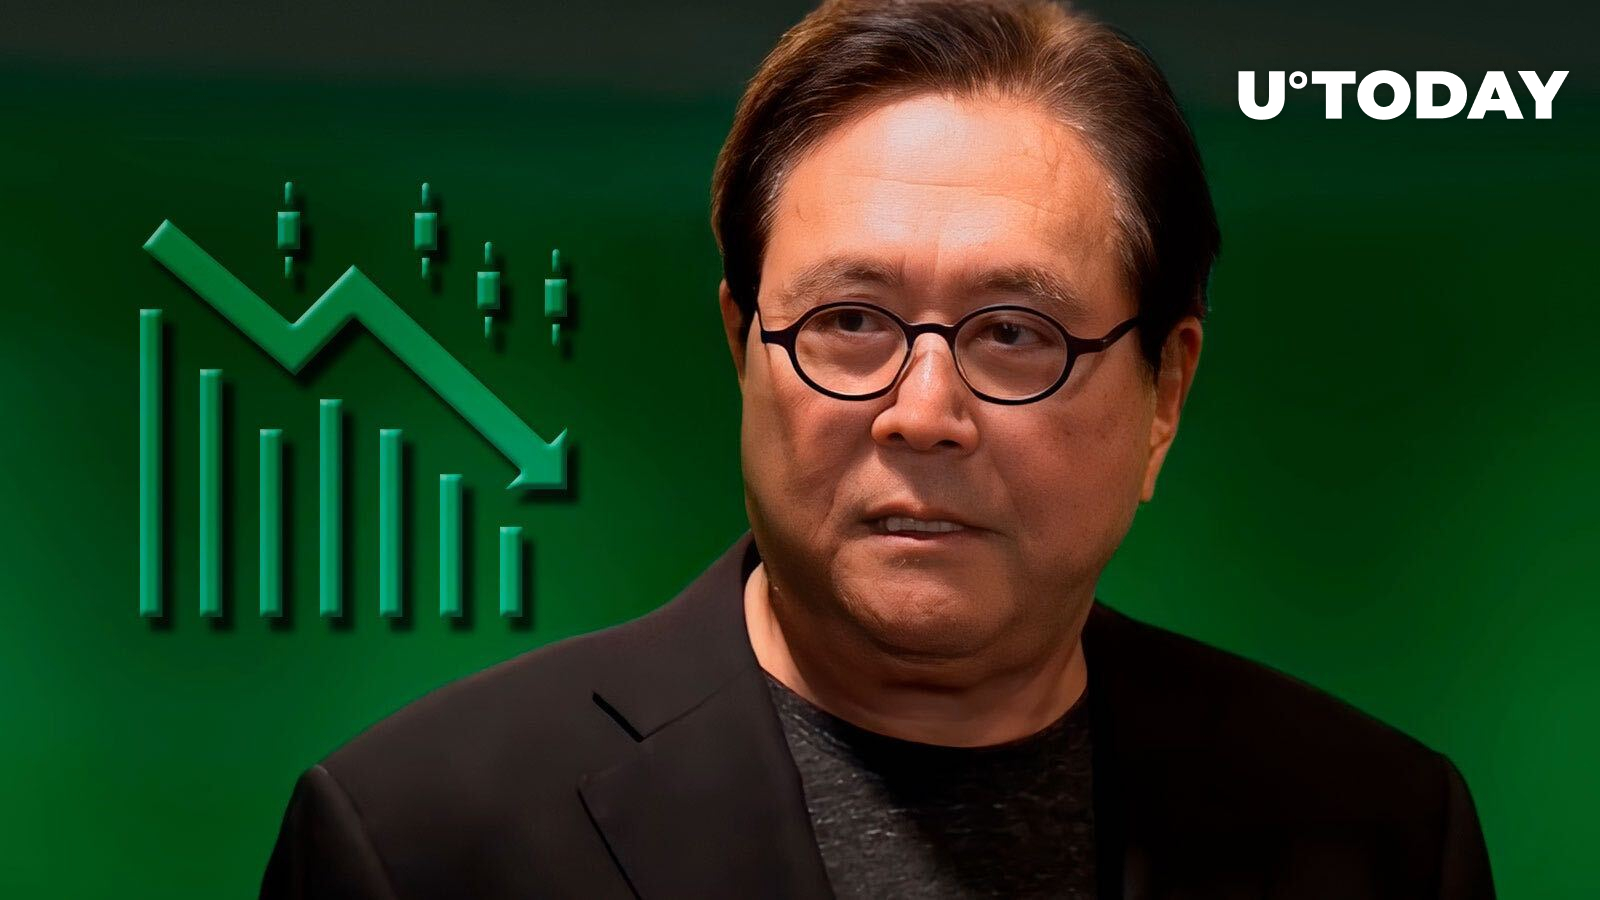 rich-dad-poor-dad-author-kiyosaki-says-market-crash-he-foretold-in-2013-is-here-and-it-s-time-to-get-richer